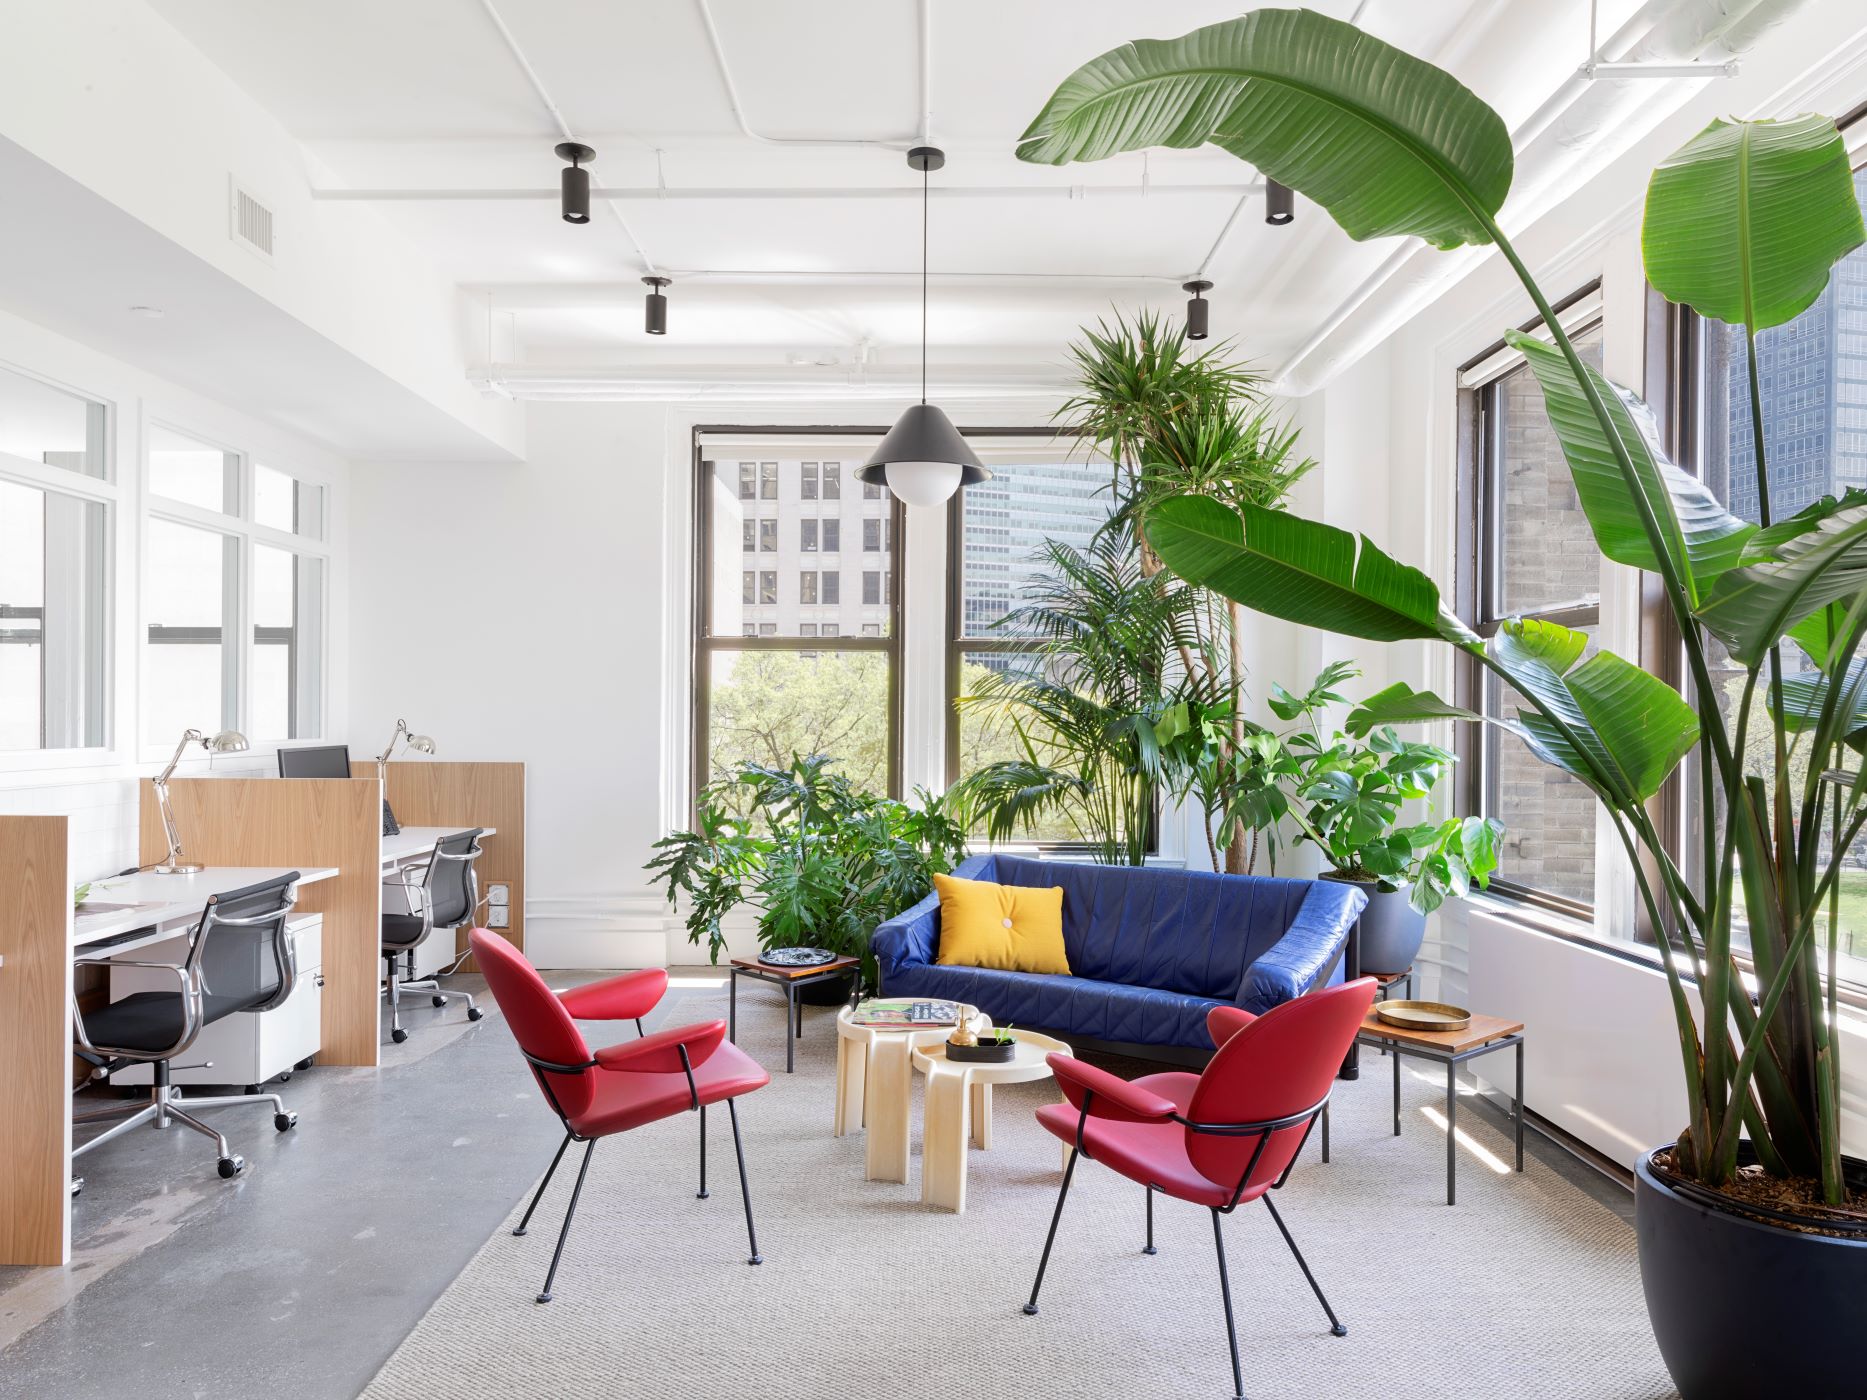 Communal lounge area of an office with plants